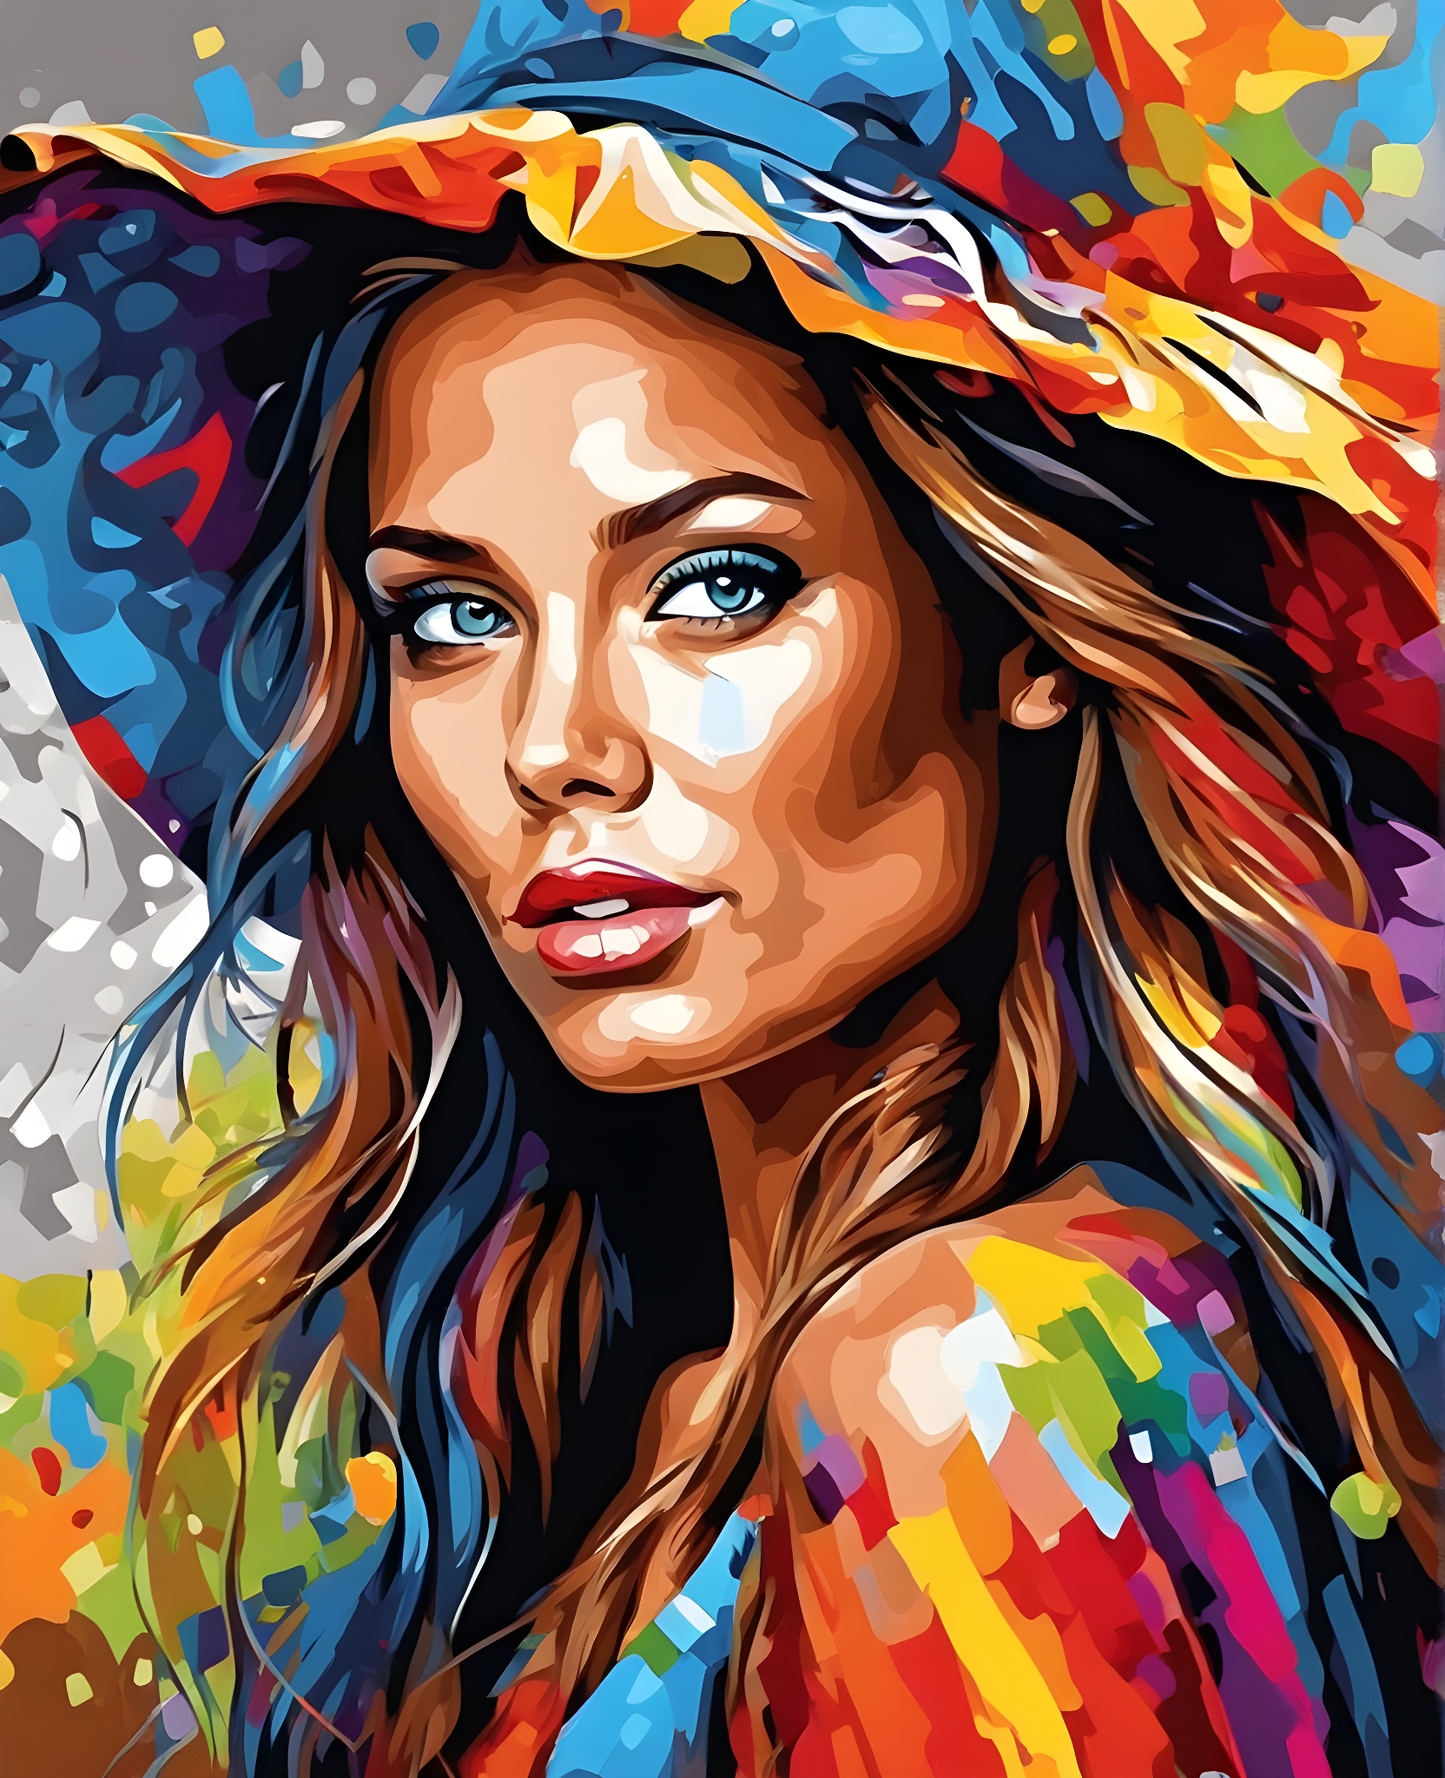 A Colorful Woman (2) - Van-Go Paint-By-Number Kit